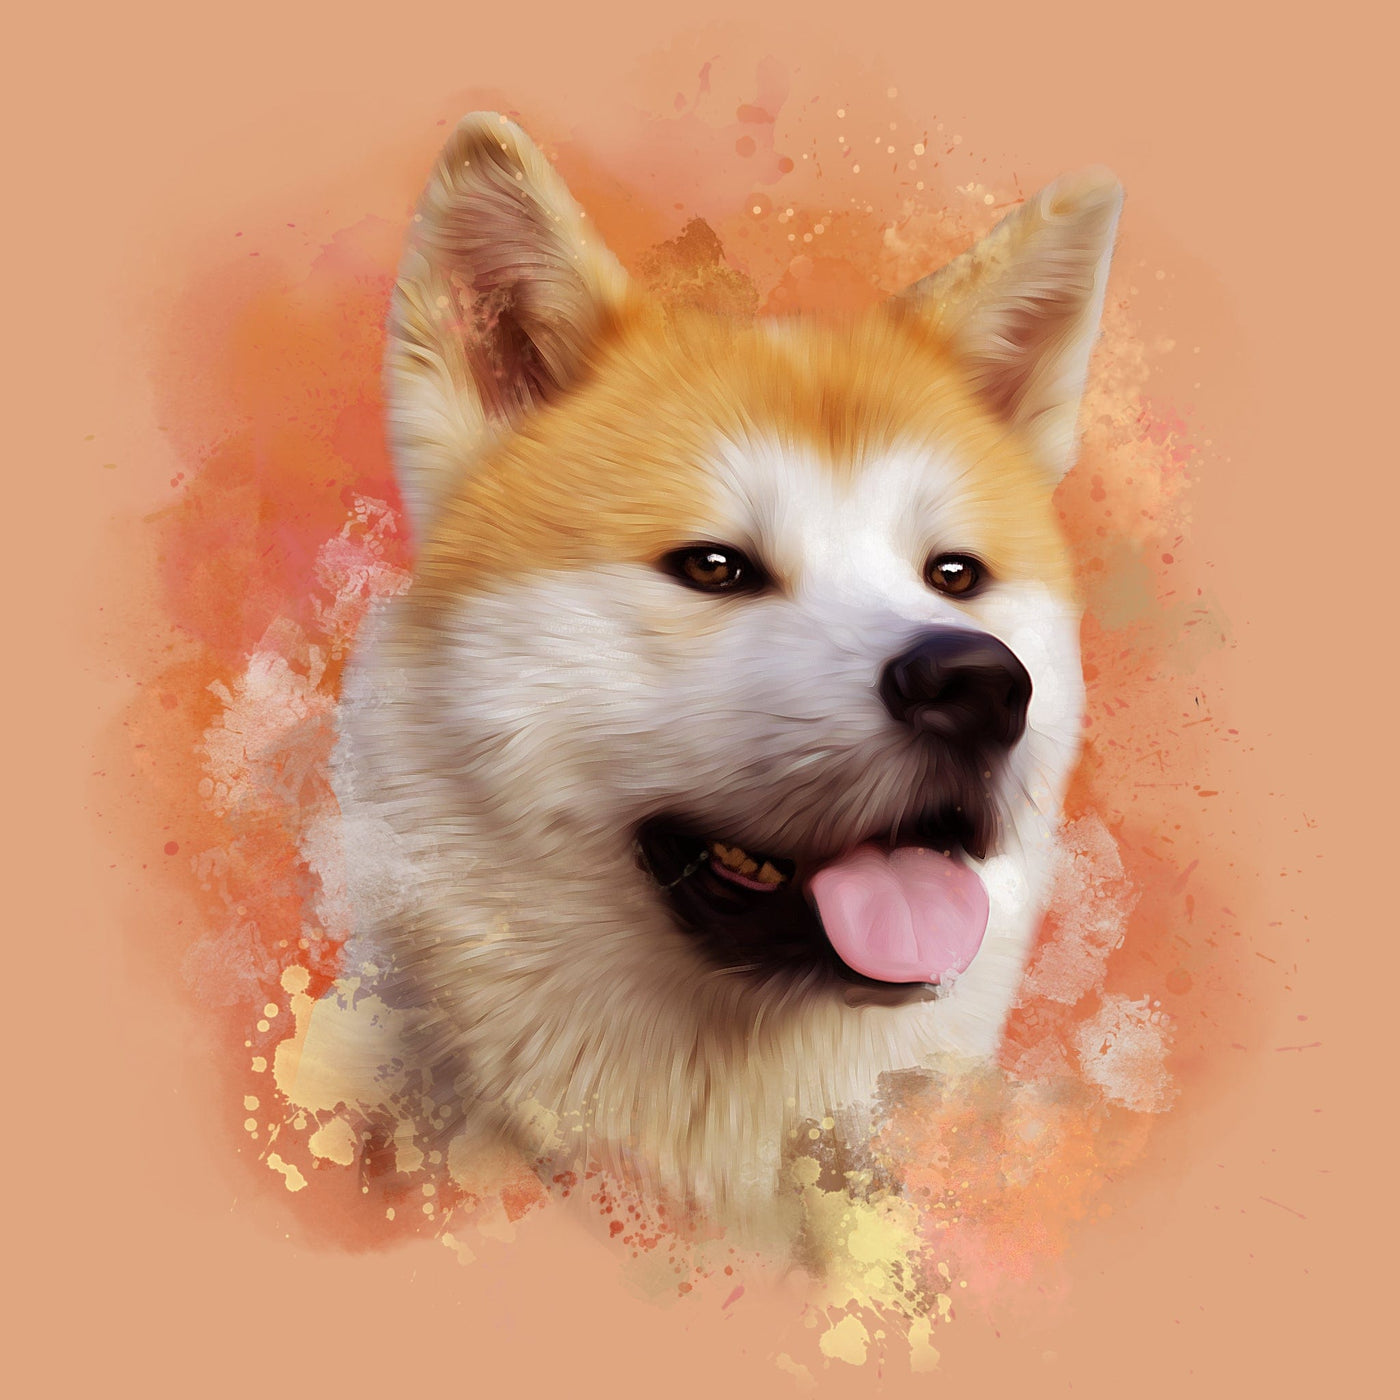 dog watercolor painting of a cute dog with white and orange fur